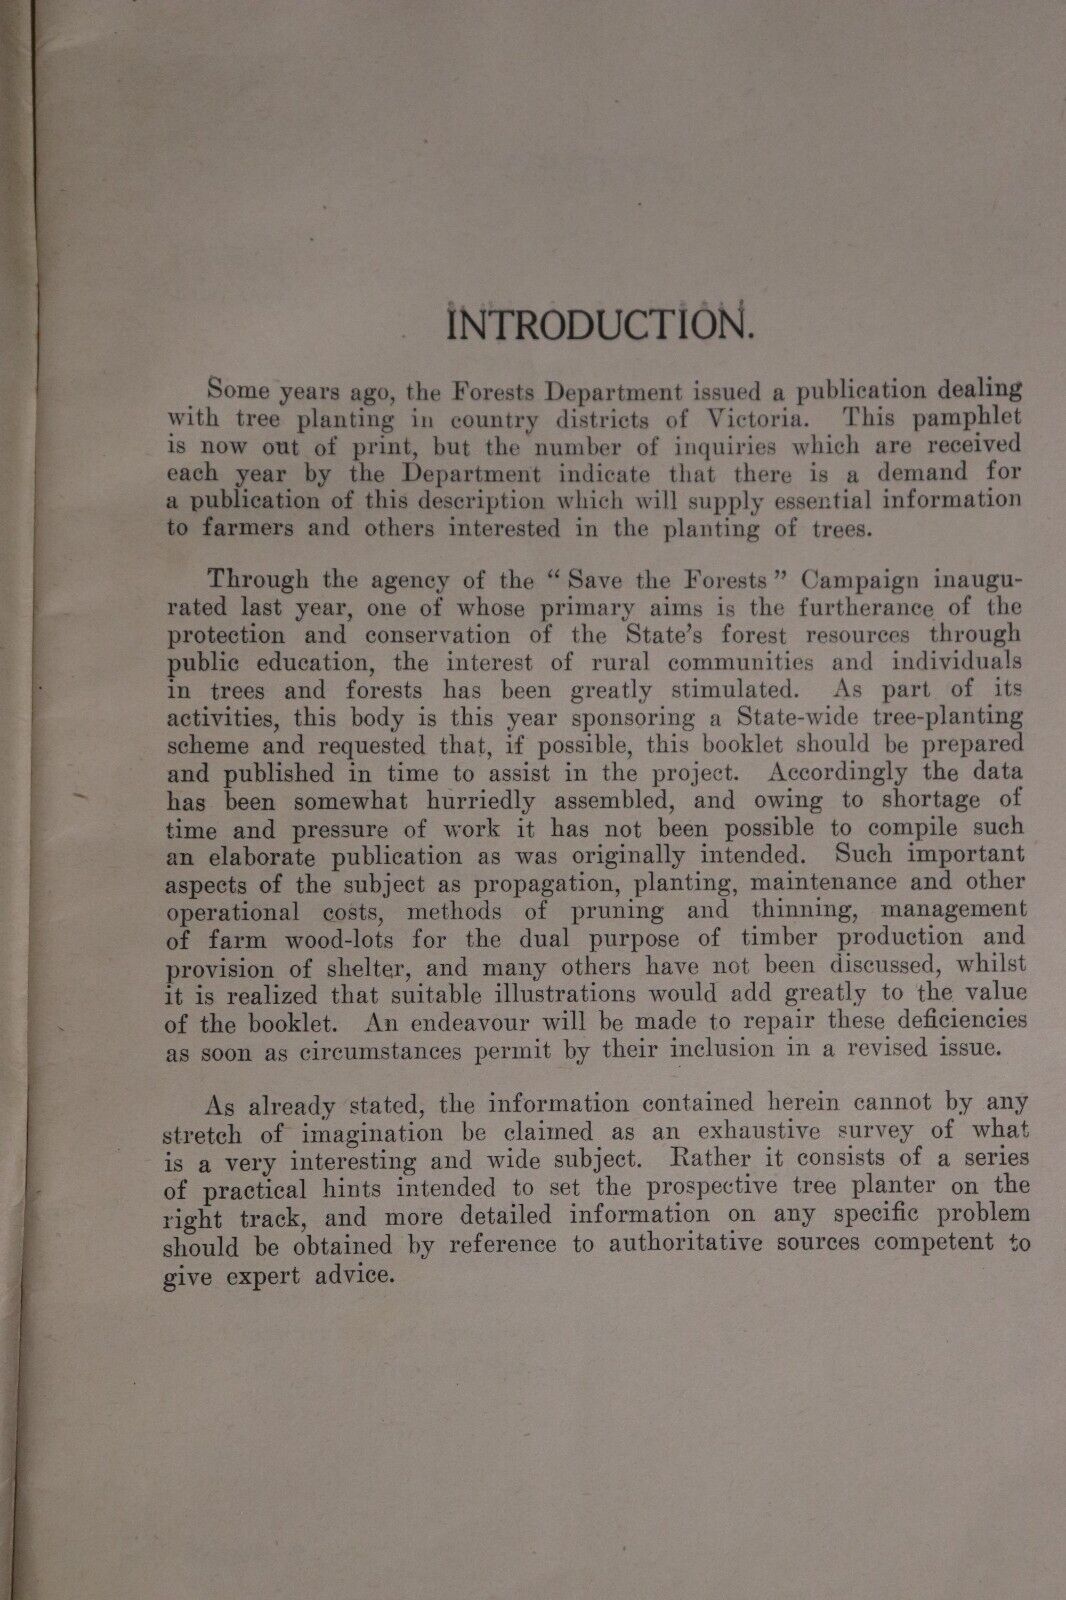 Selection, Propagation & Planting Of Trees In Victoria  - 1945 - History Book